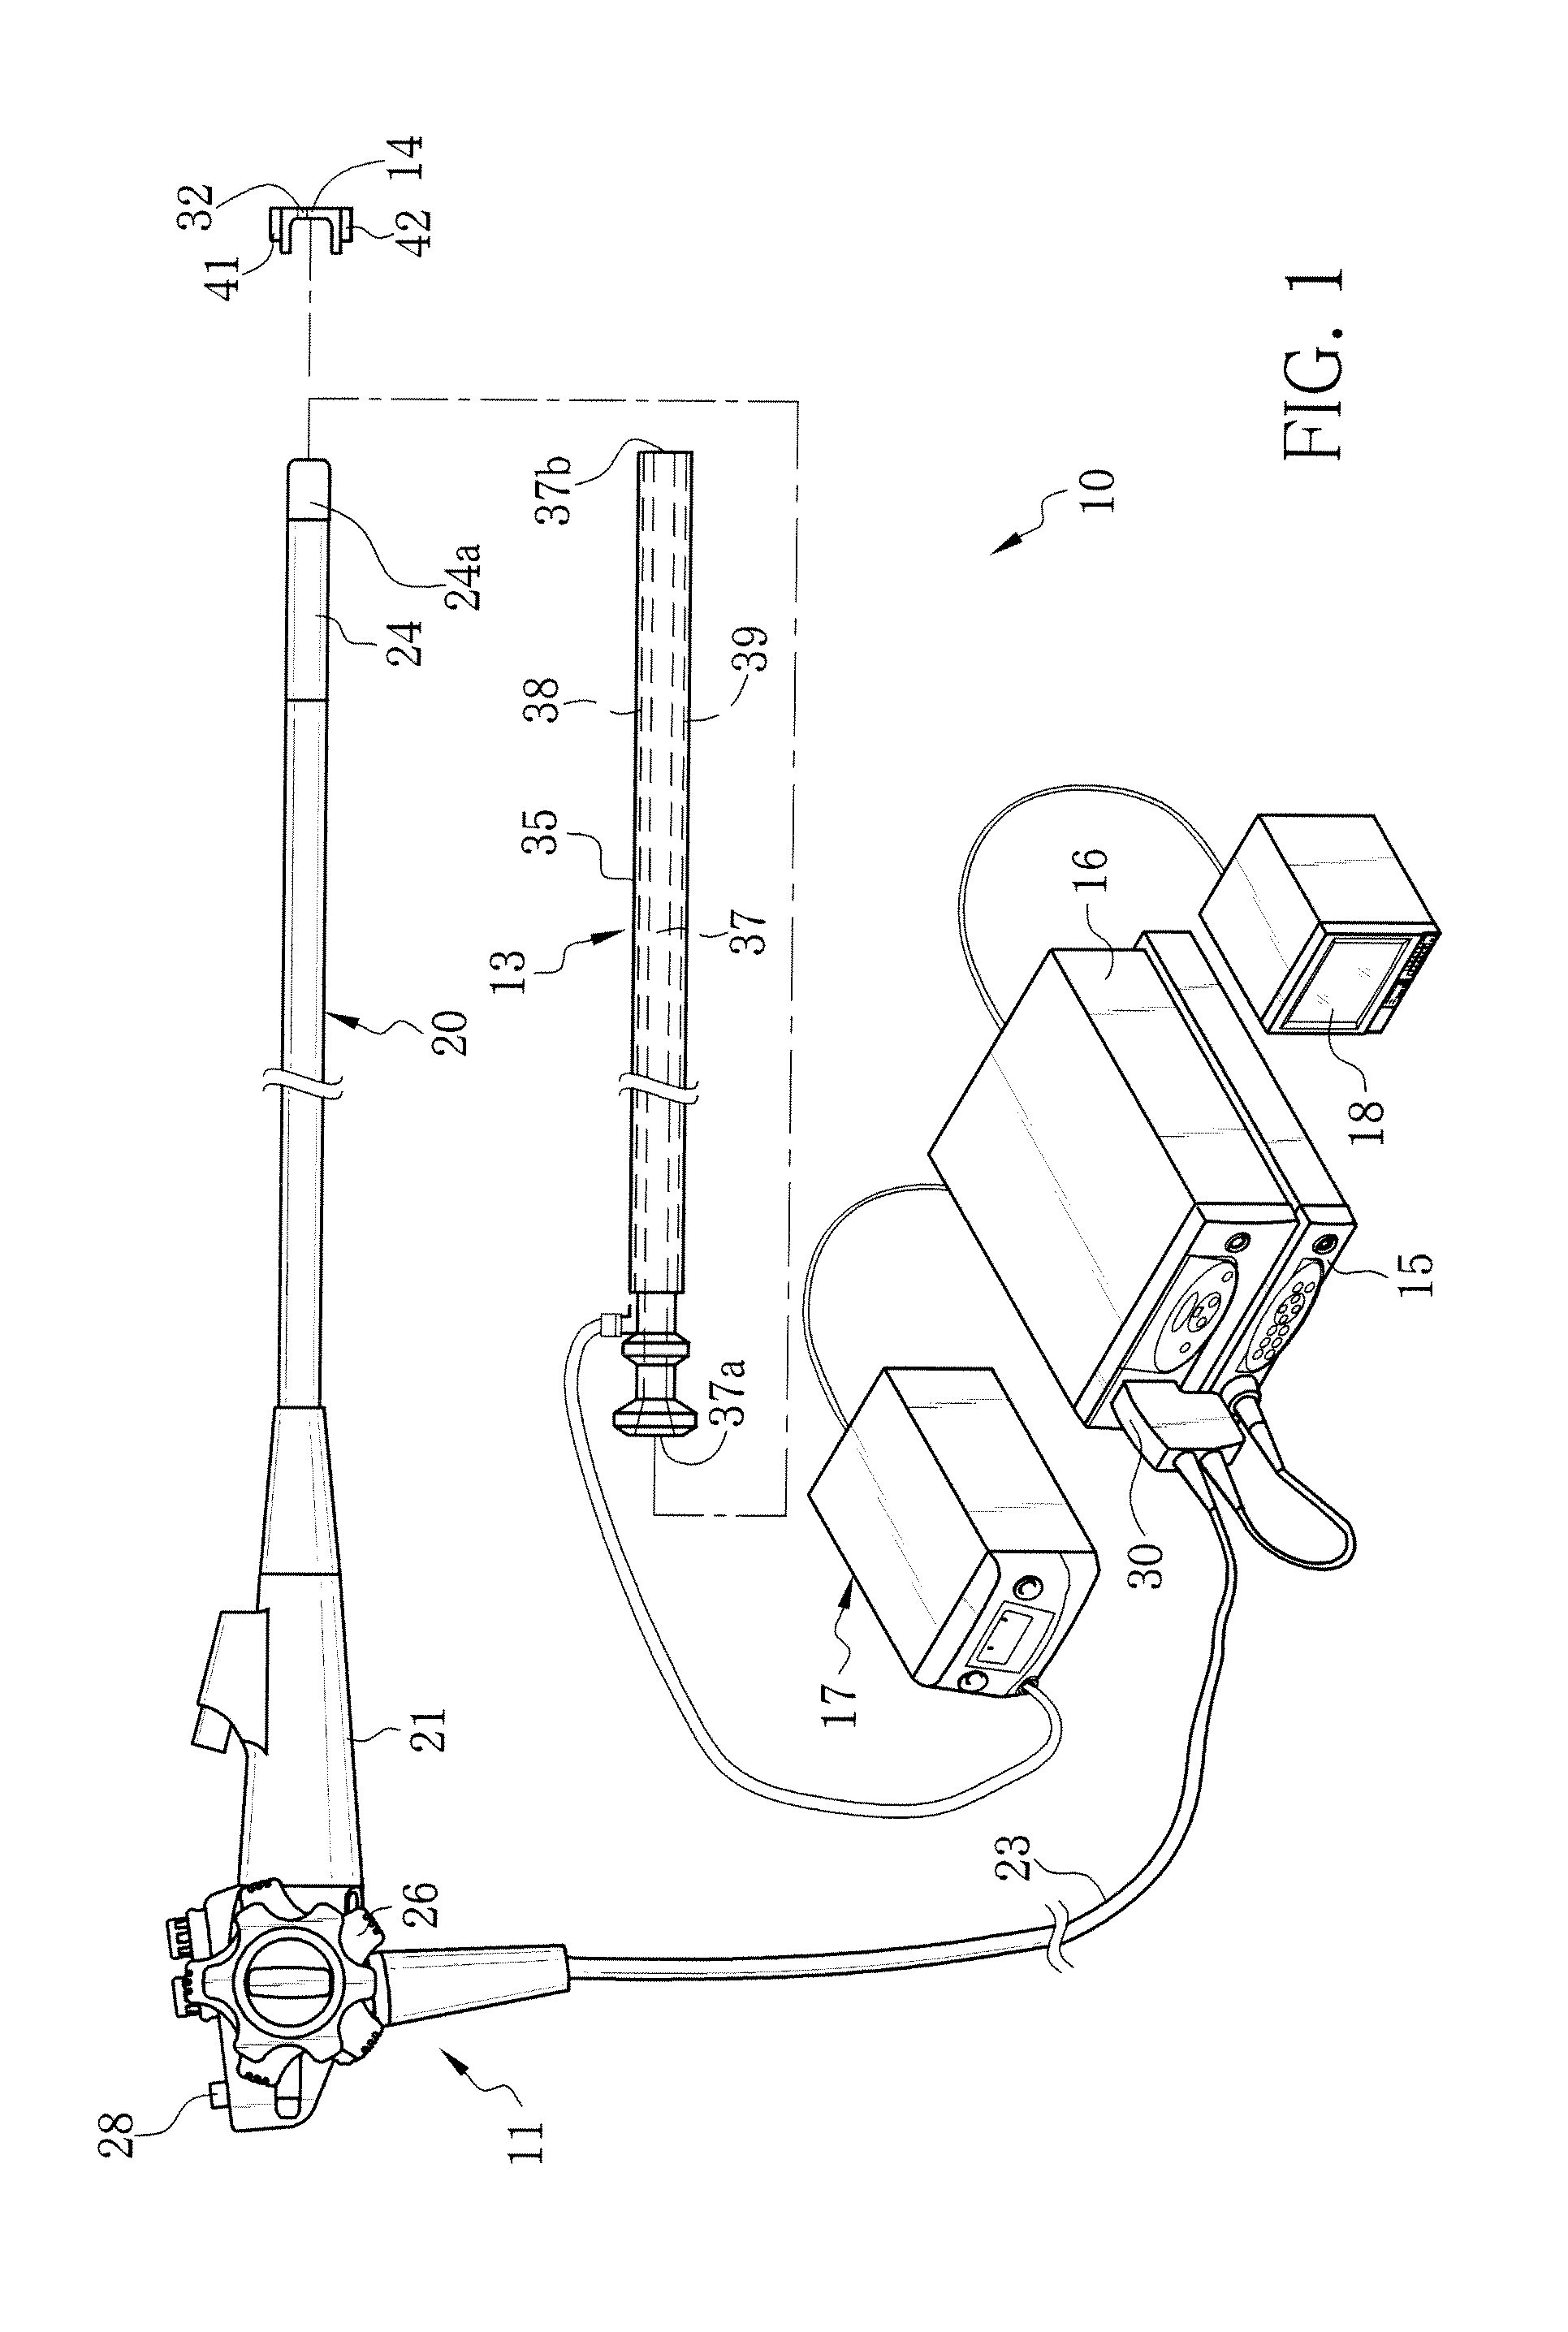 Electronic endoscope system having processor device, and method for processing endoscopic image